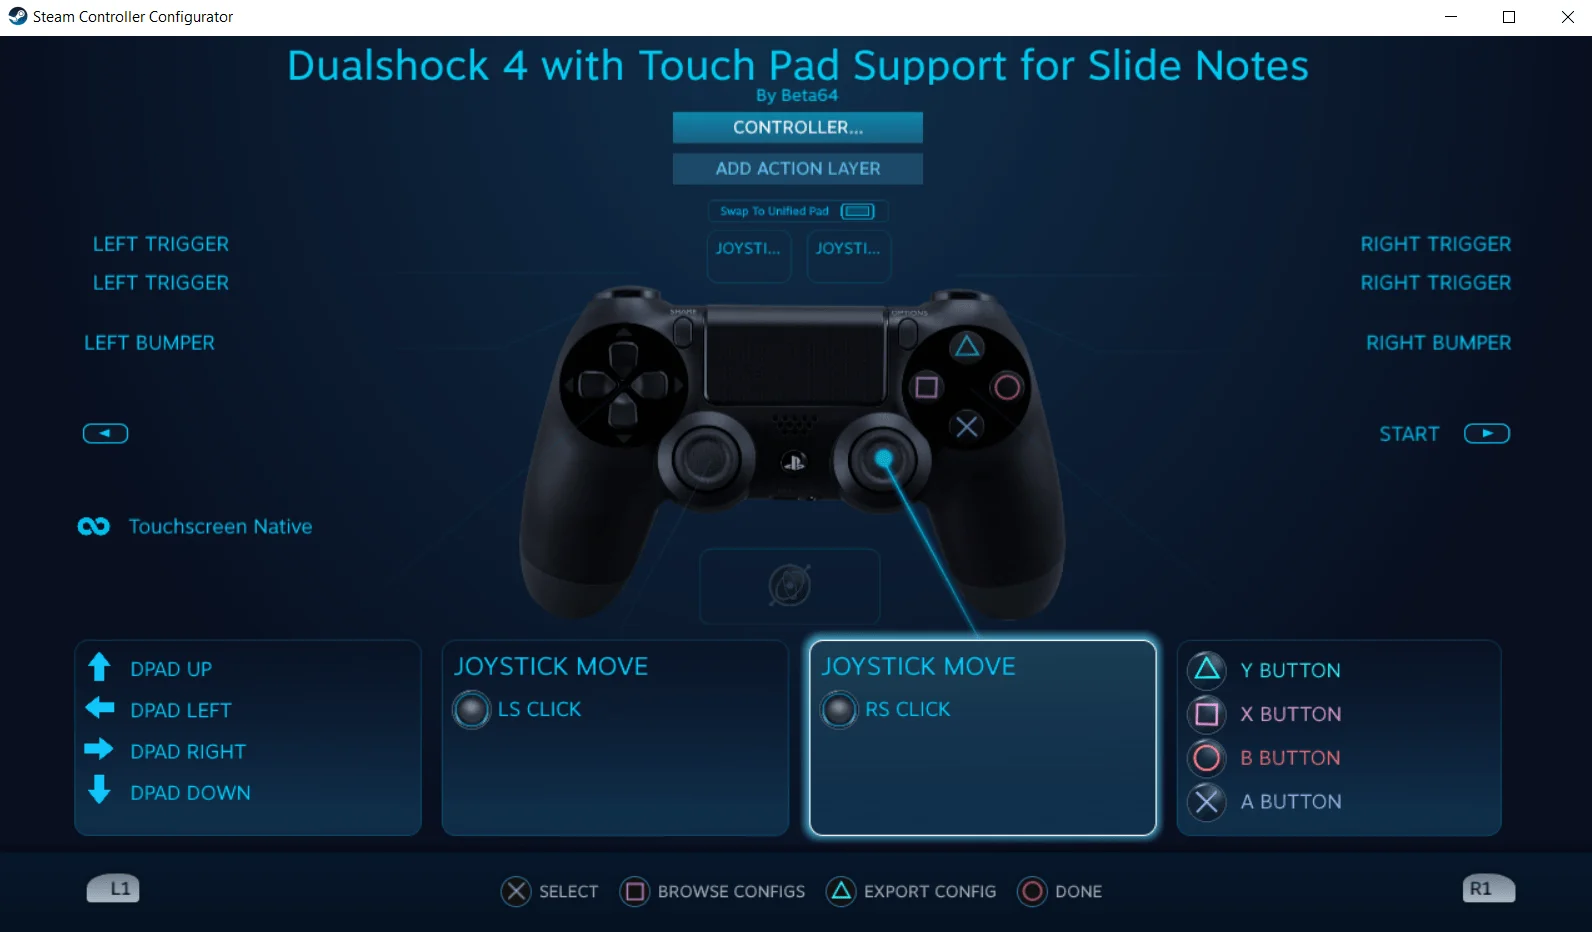 How to use DS4 Touch Pad for Slide Notes-11